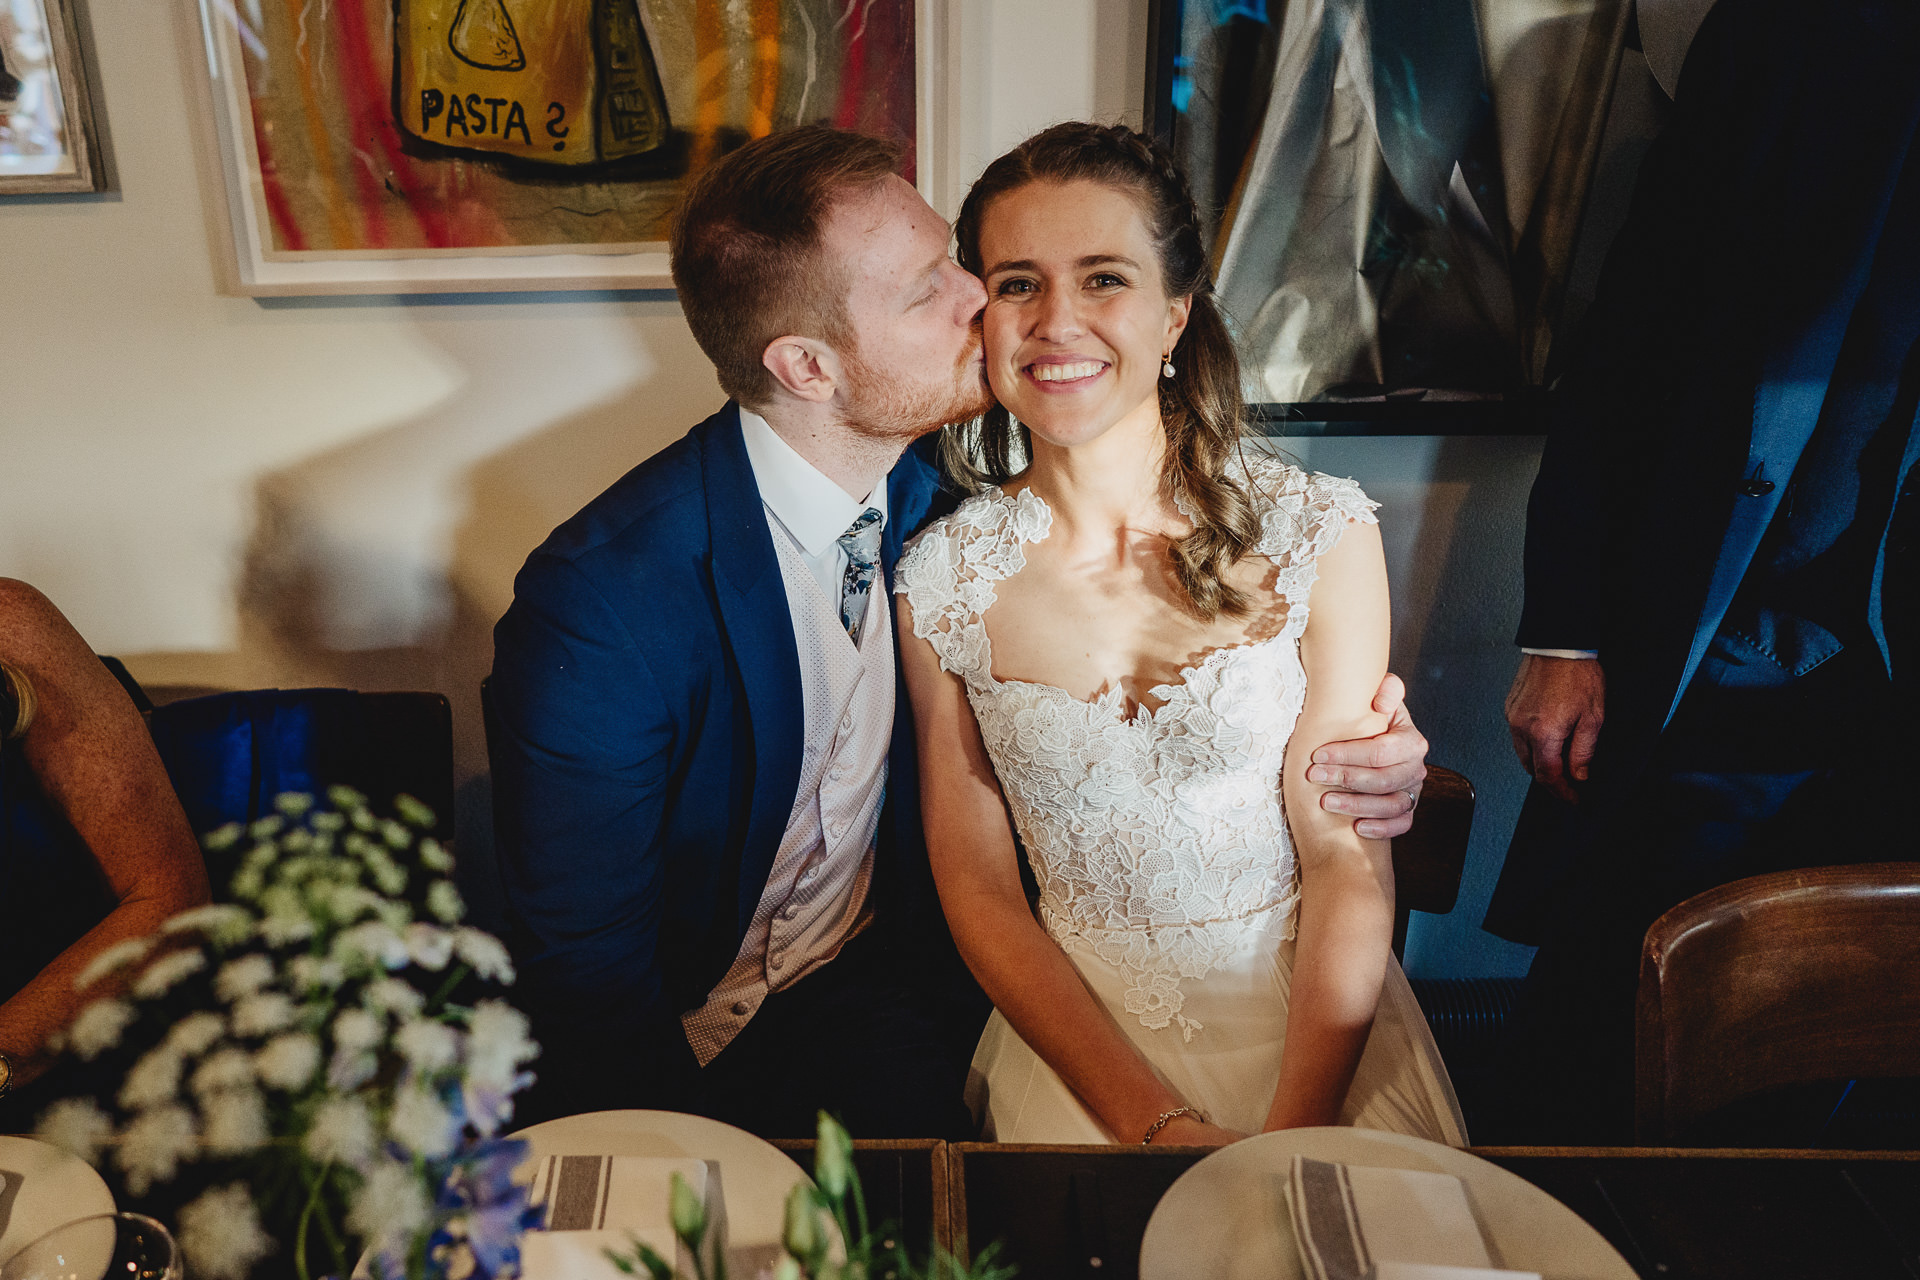 Groom kissing bride while seated at the table